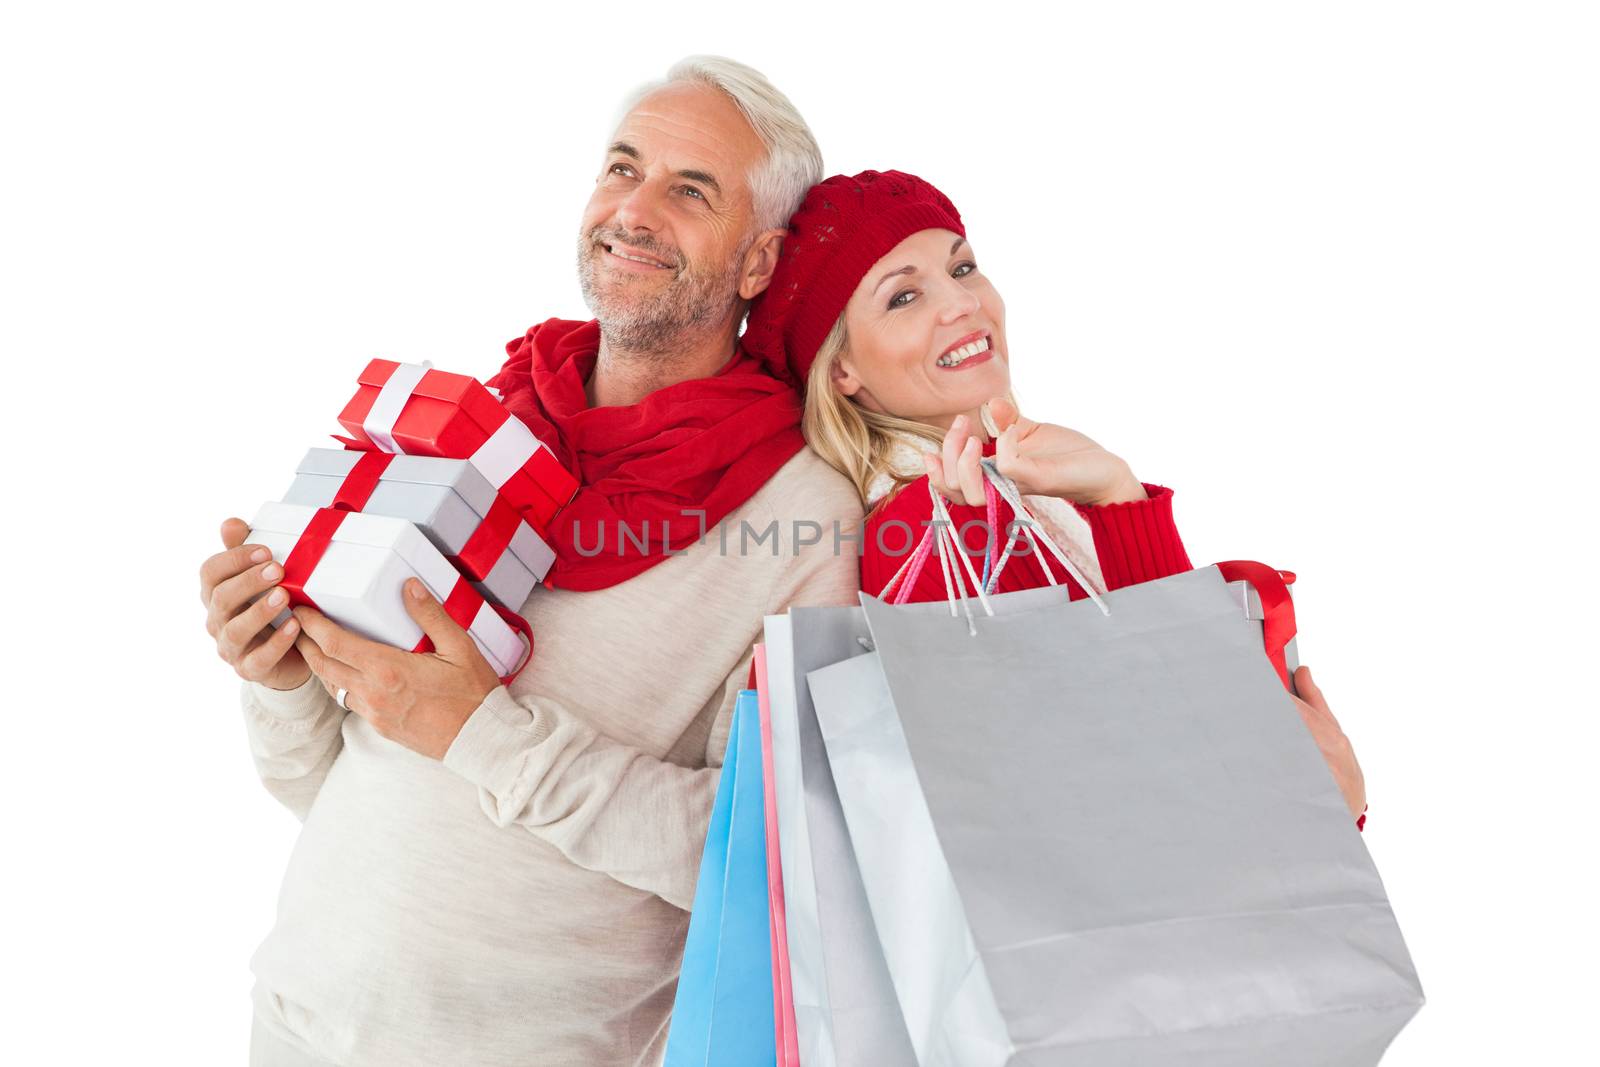 Smiling couple in winter fashion holding presents and shopping bags on white background